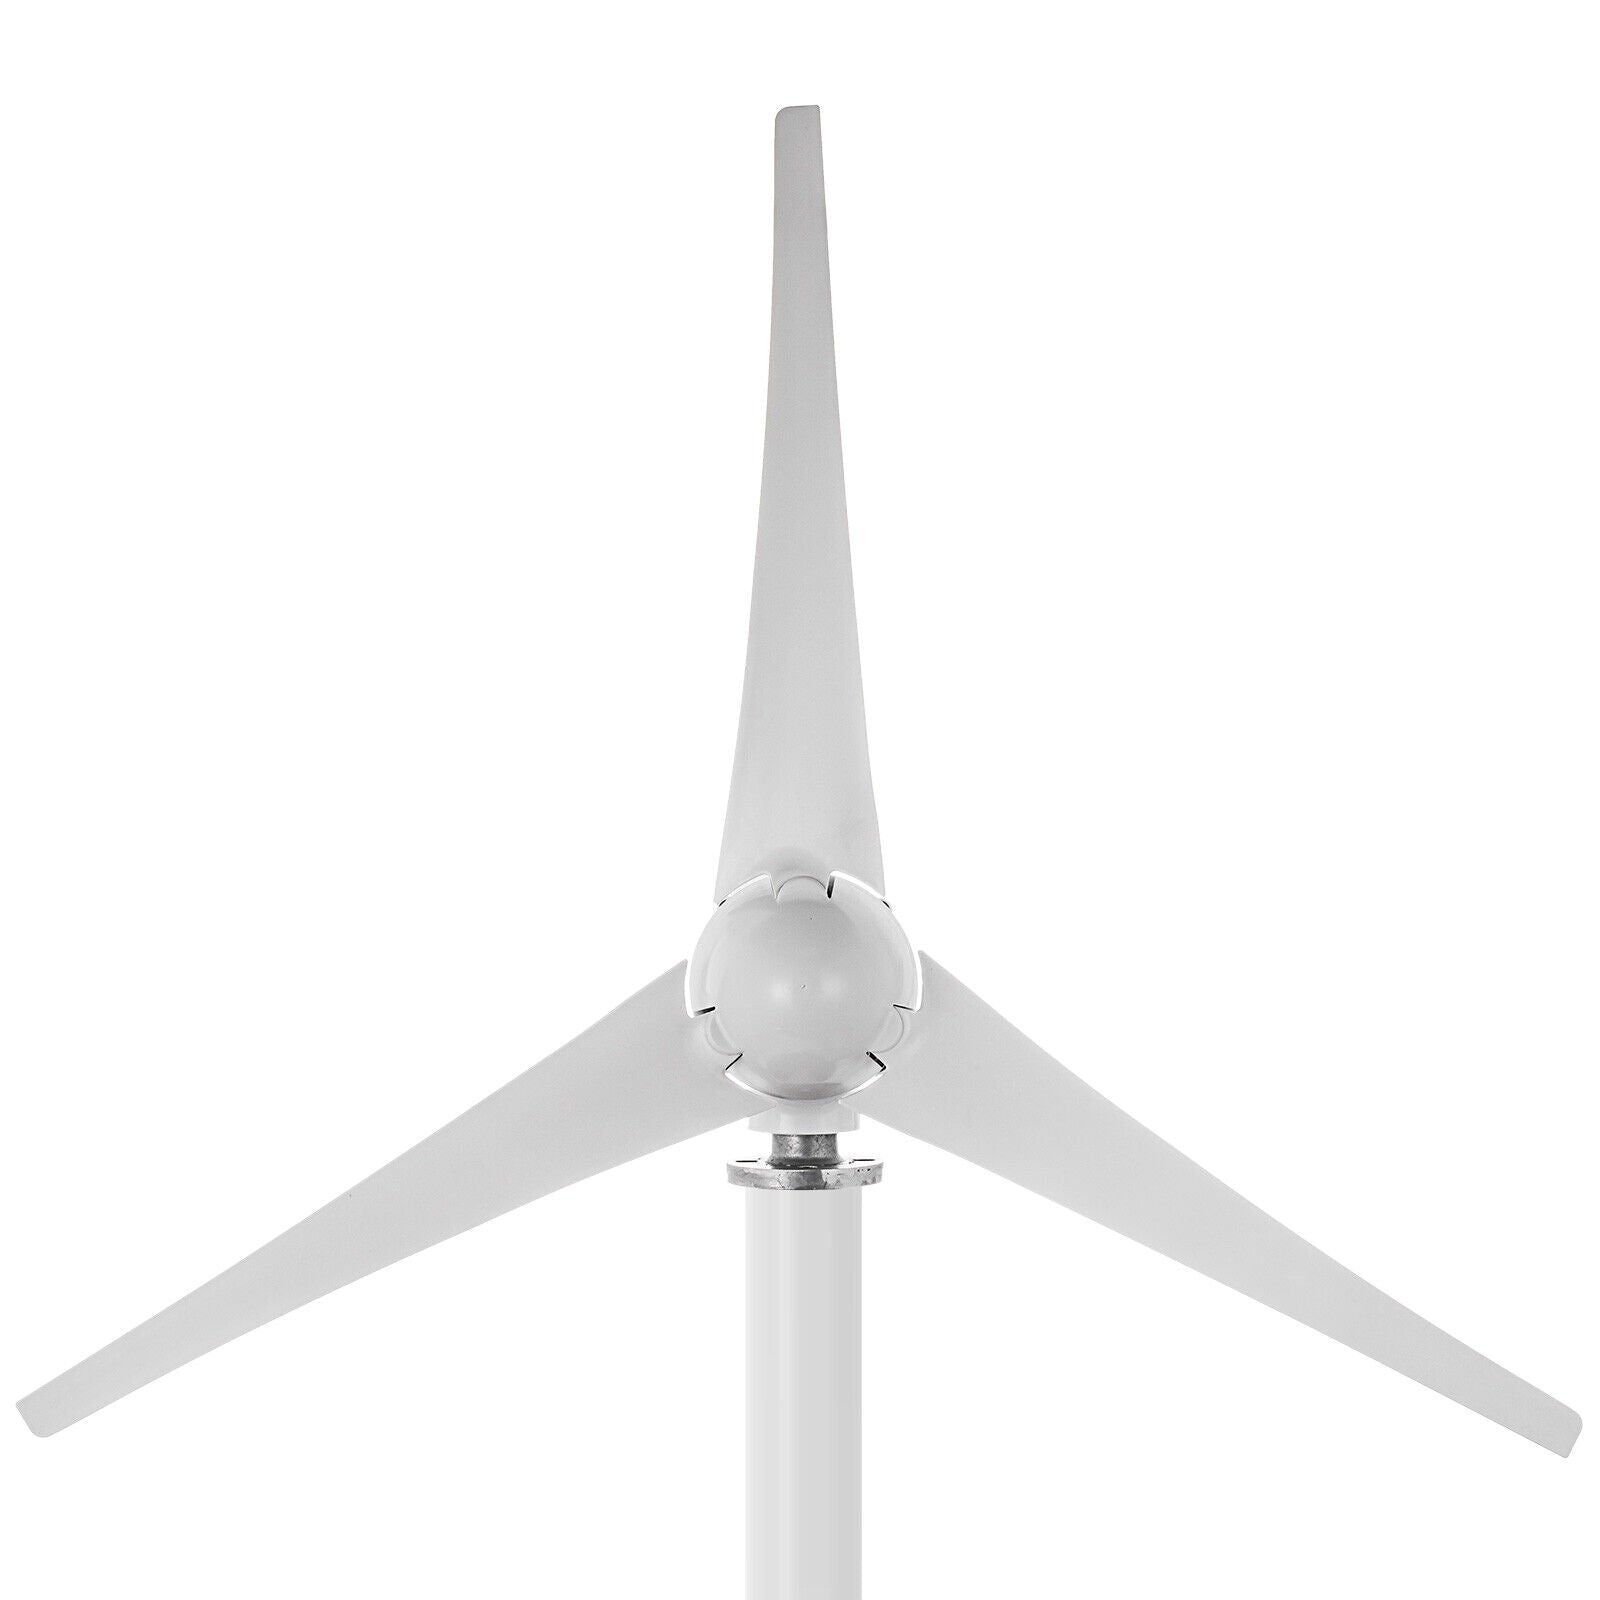 400W Hybrid Wind Turbine Generator Kit With DC24V Charge Controller 3 Blades